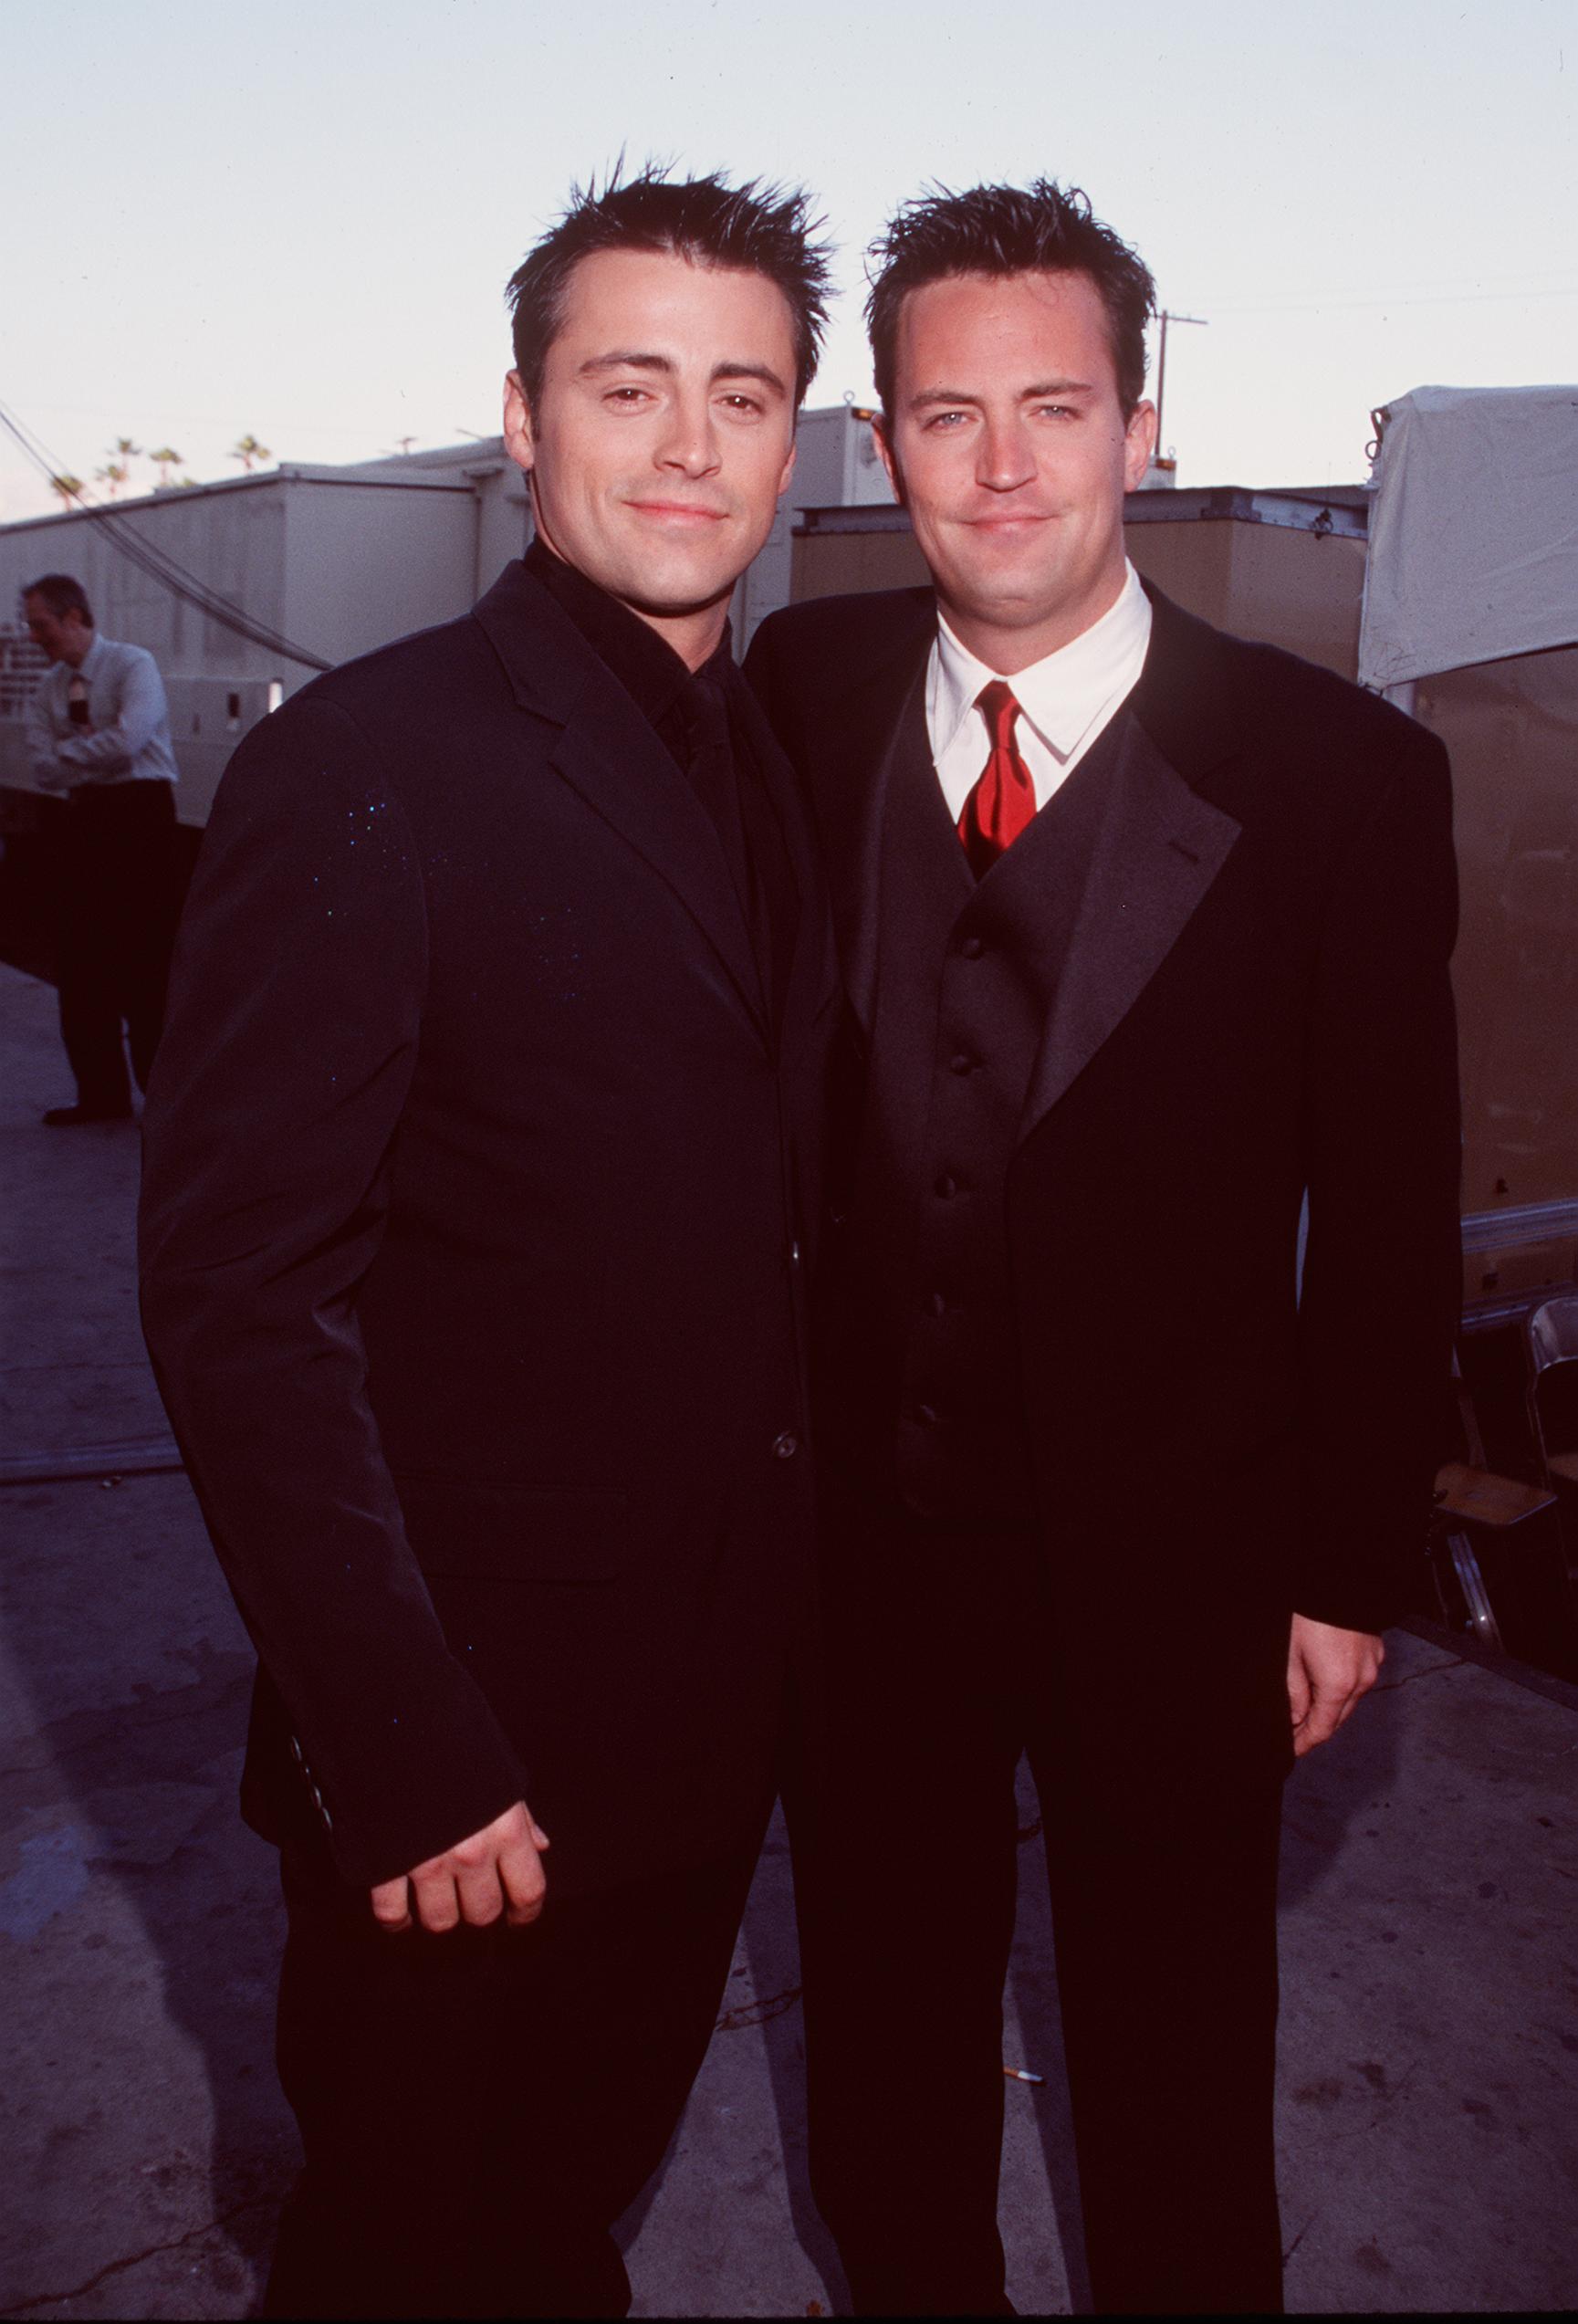 Matt LeBlanc and Matthew Perry at the 5th Annual Screen Actors Guild Awards in Los Angeles, California on March 7, 1999 | Source: Getty Images